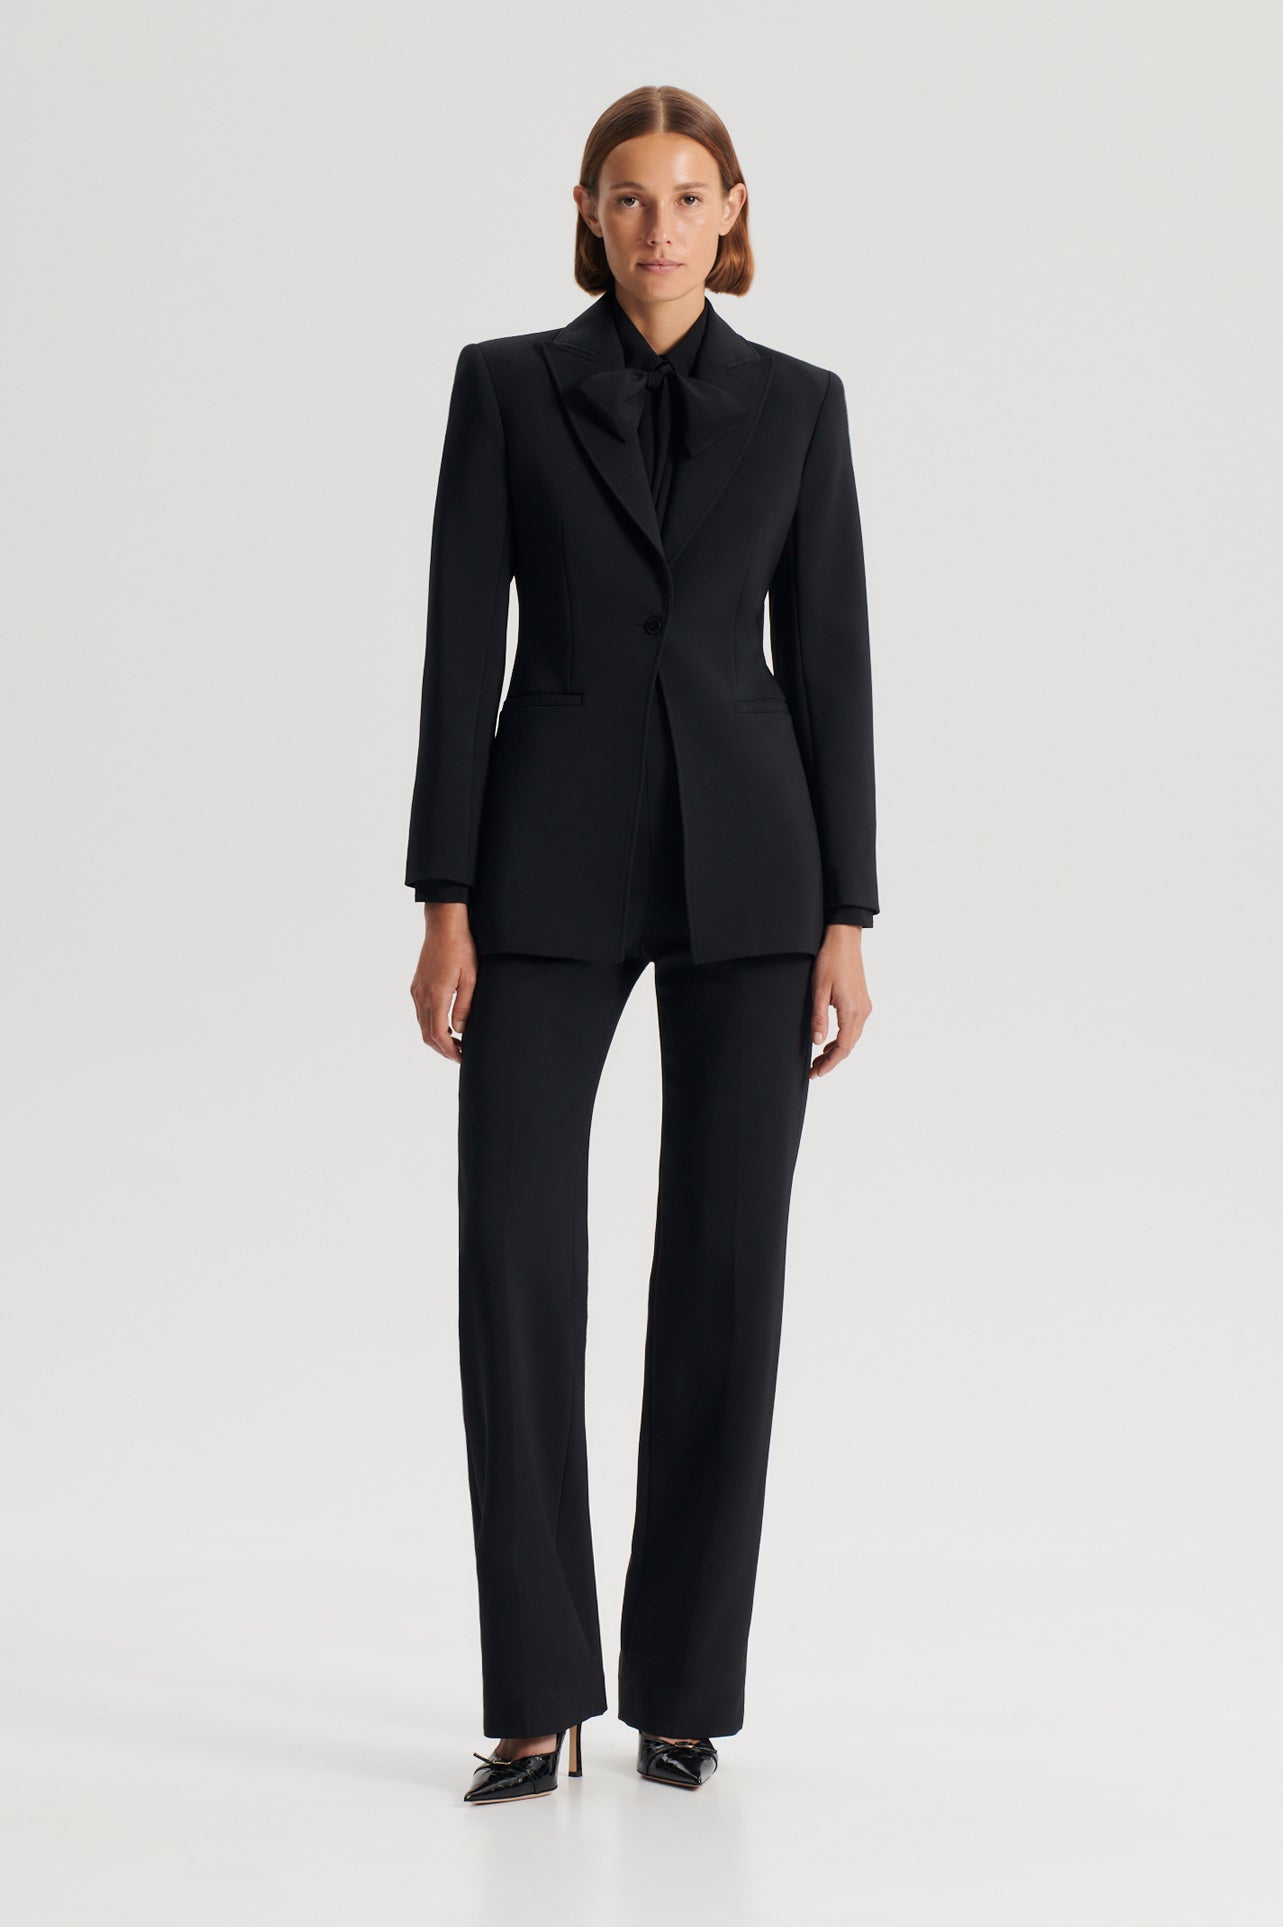 TAILORED CROPPED TROUSER - BLACK - Scanlan Theodore